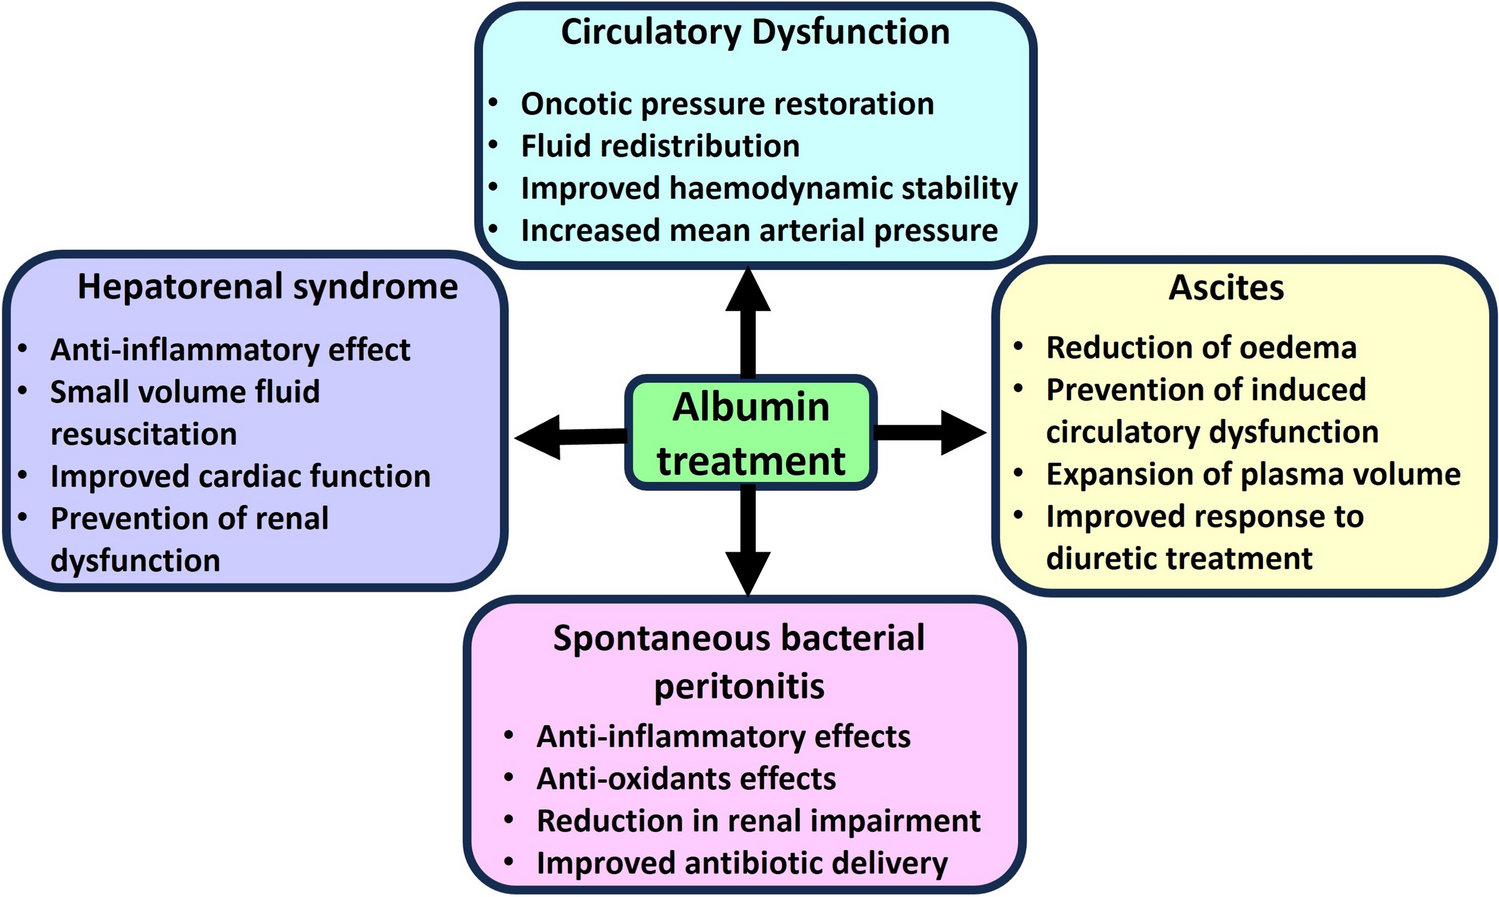 Role of albumin infusion in cirrhosis-associated complications